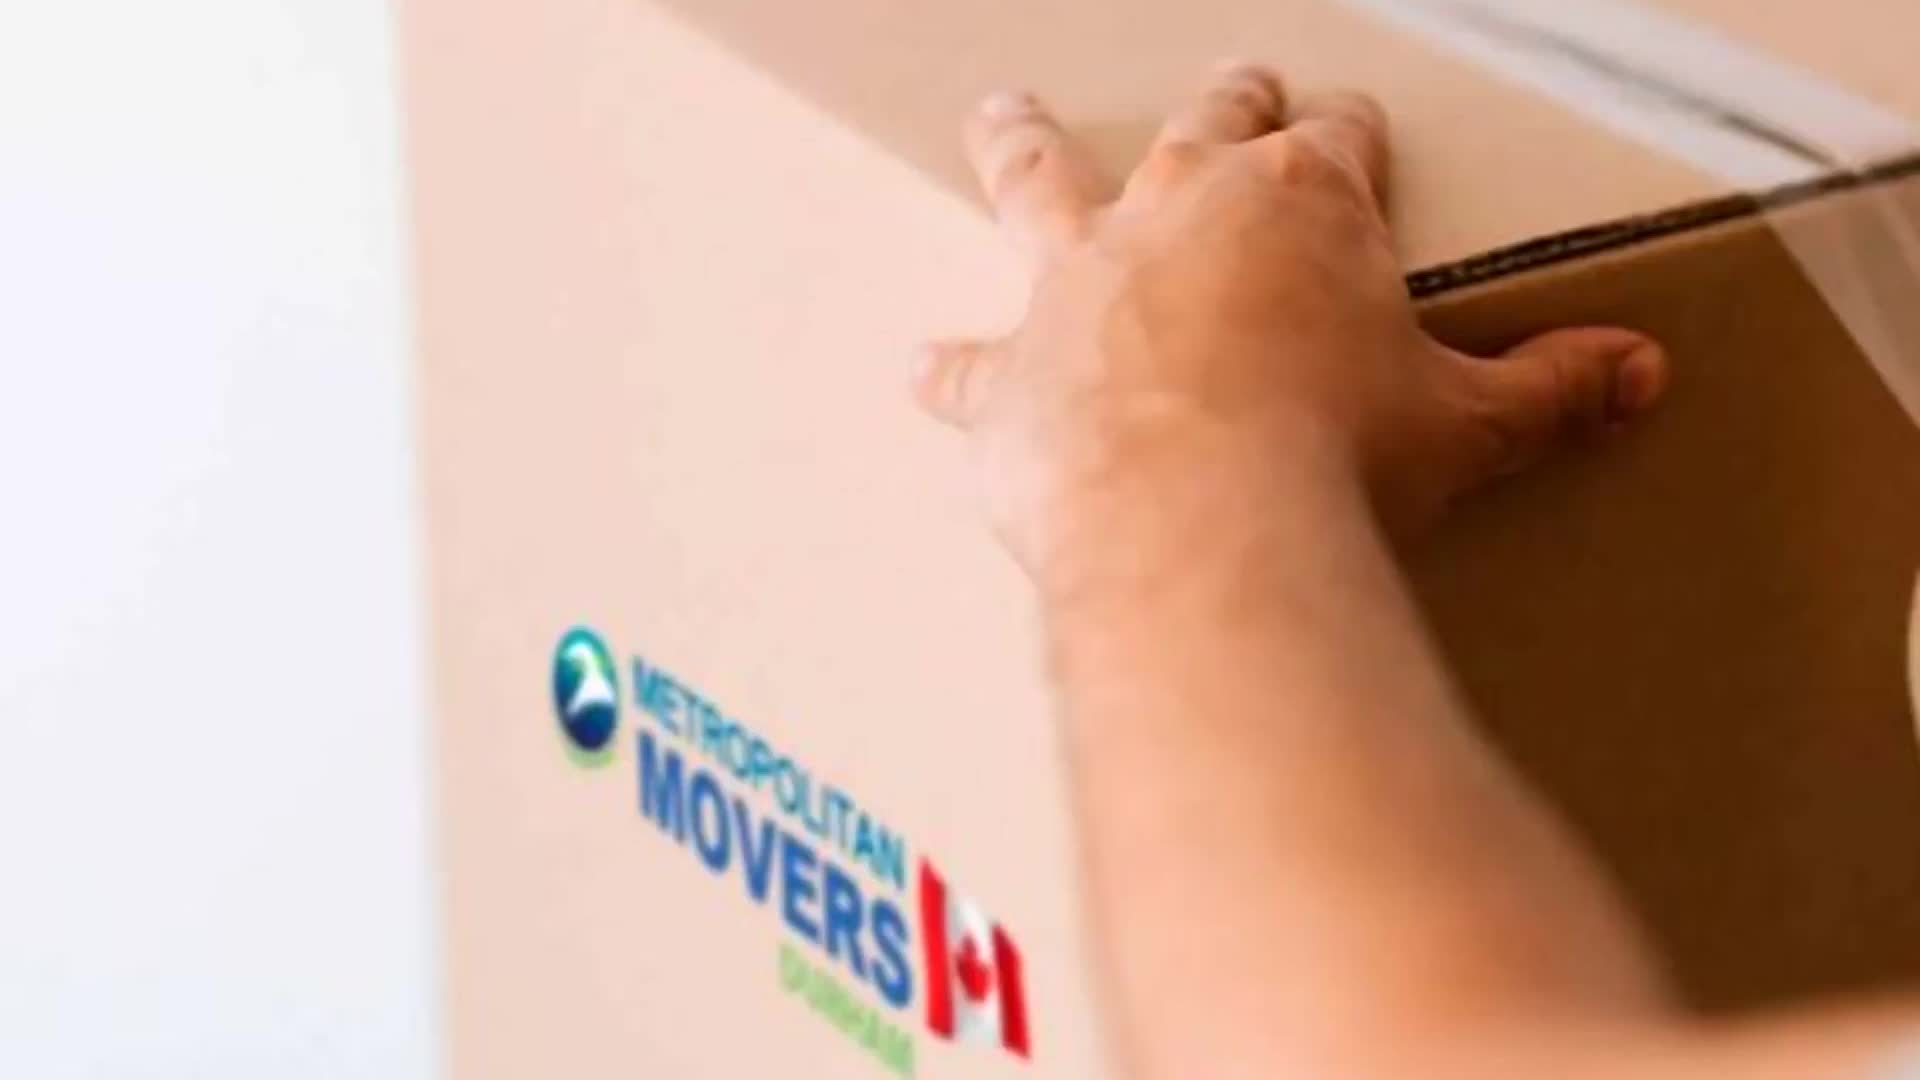 Metropolitan Movers - Moving Company in Burnaby, BC